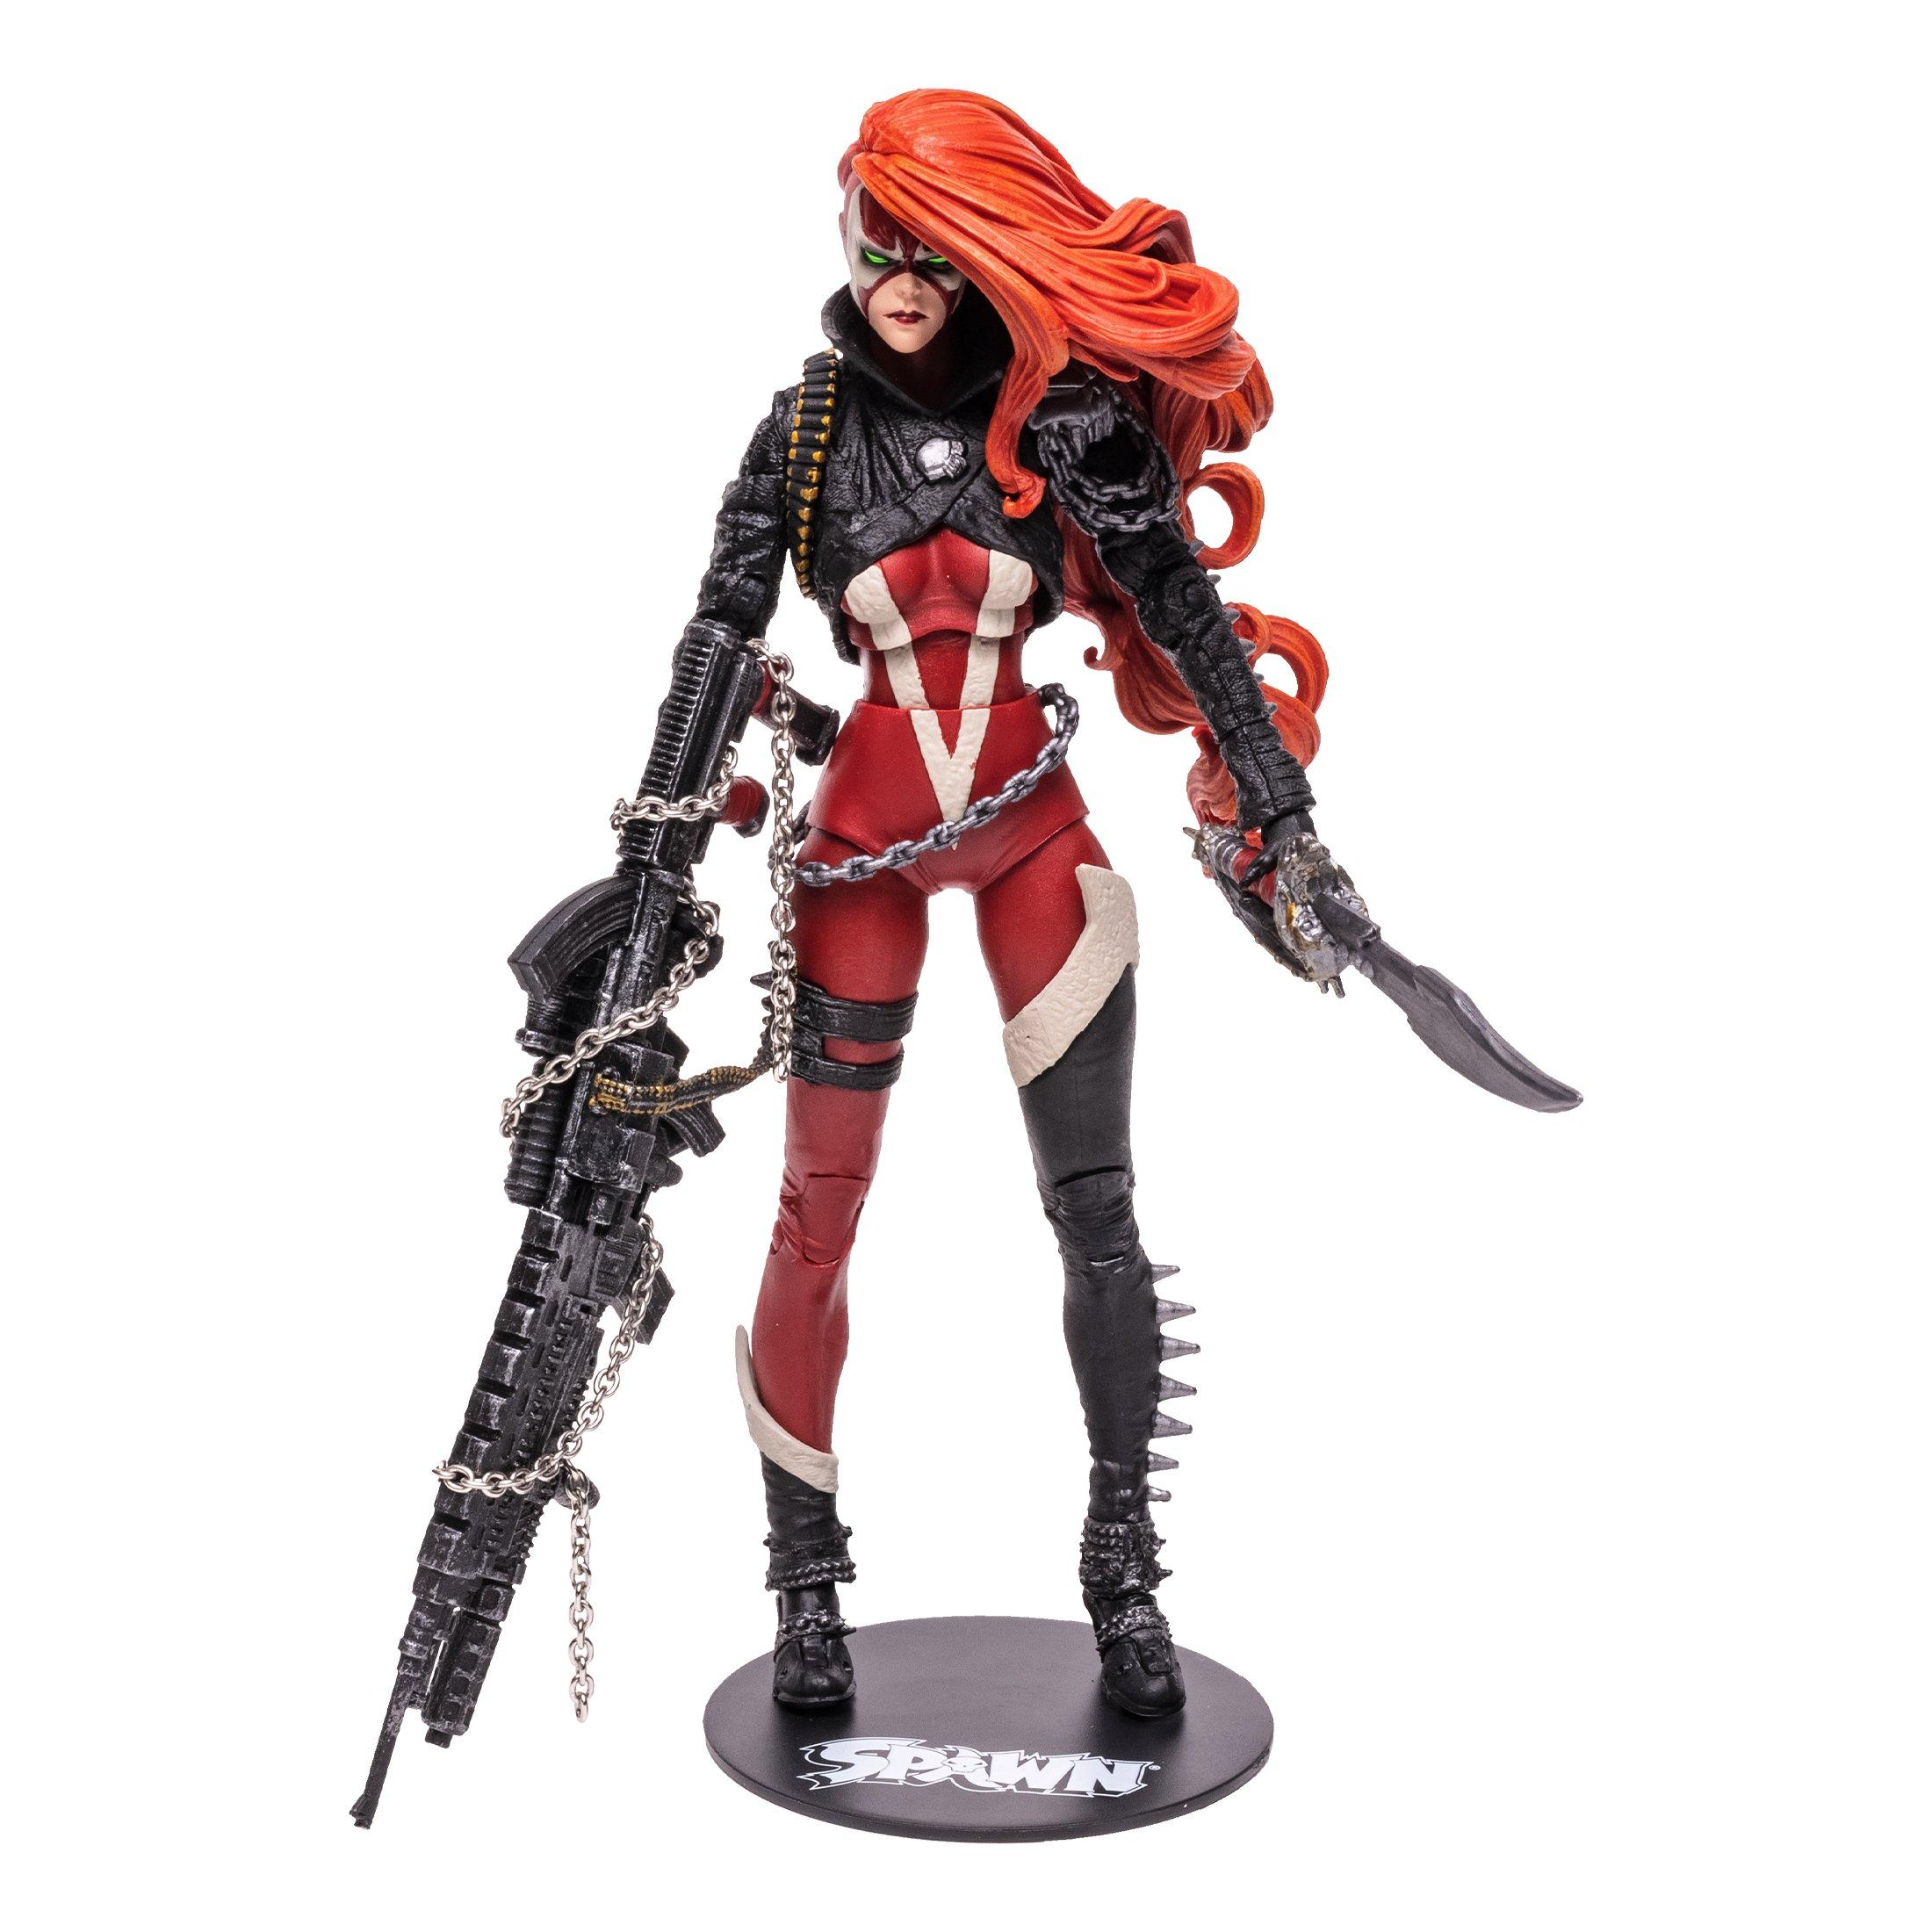 McFarlane Toys Spawn Action Figure for sale online